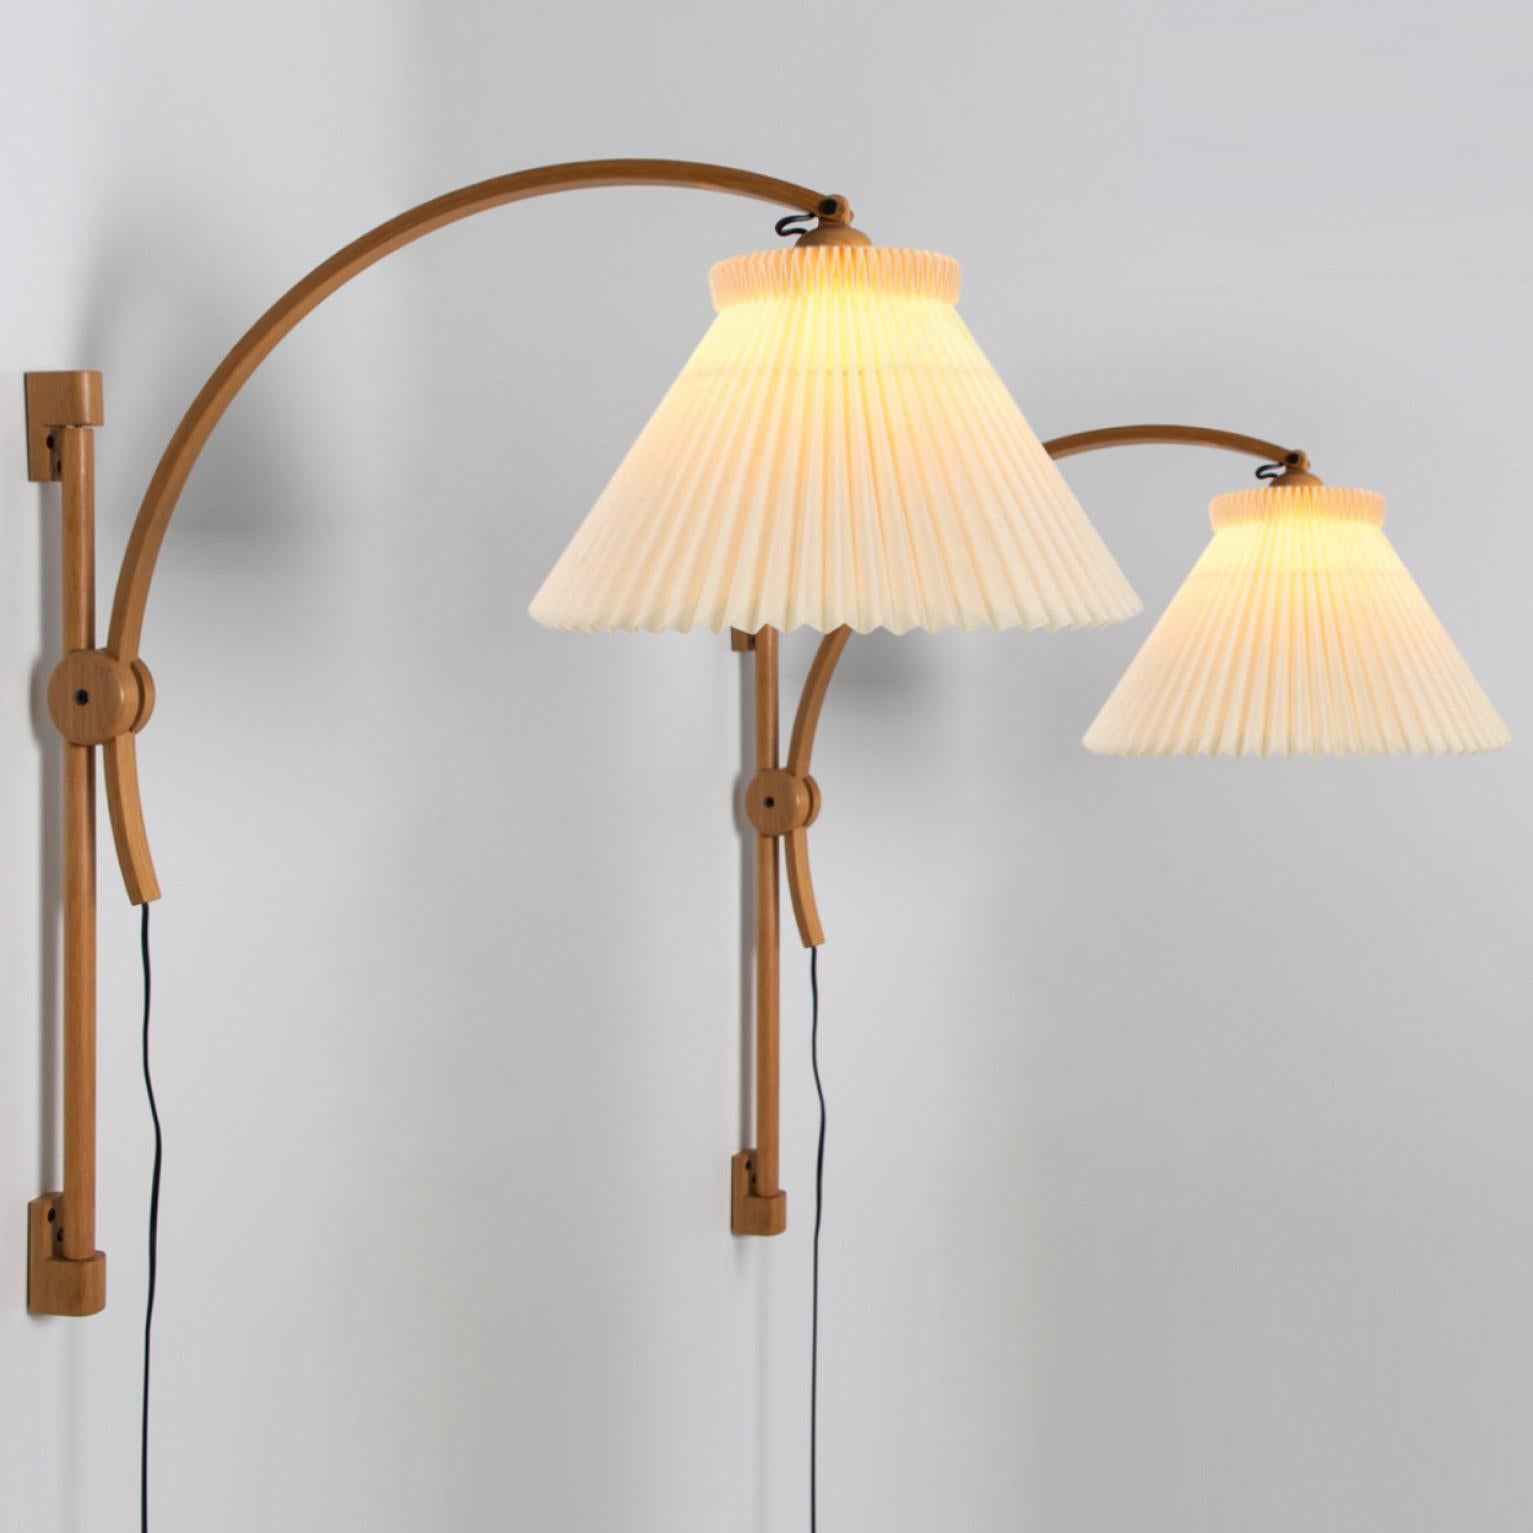 Pair of Wooden Wall Lights with New Le Klint Shade by Domus Germany, 1970s For Sale 2